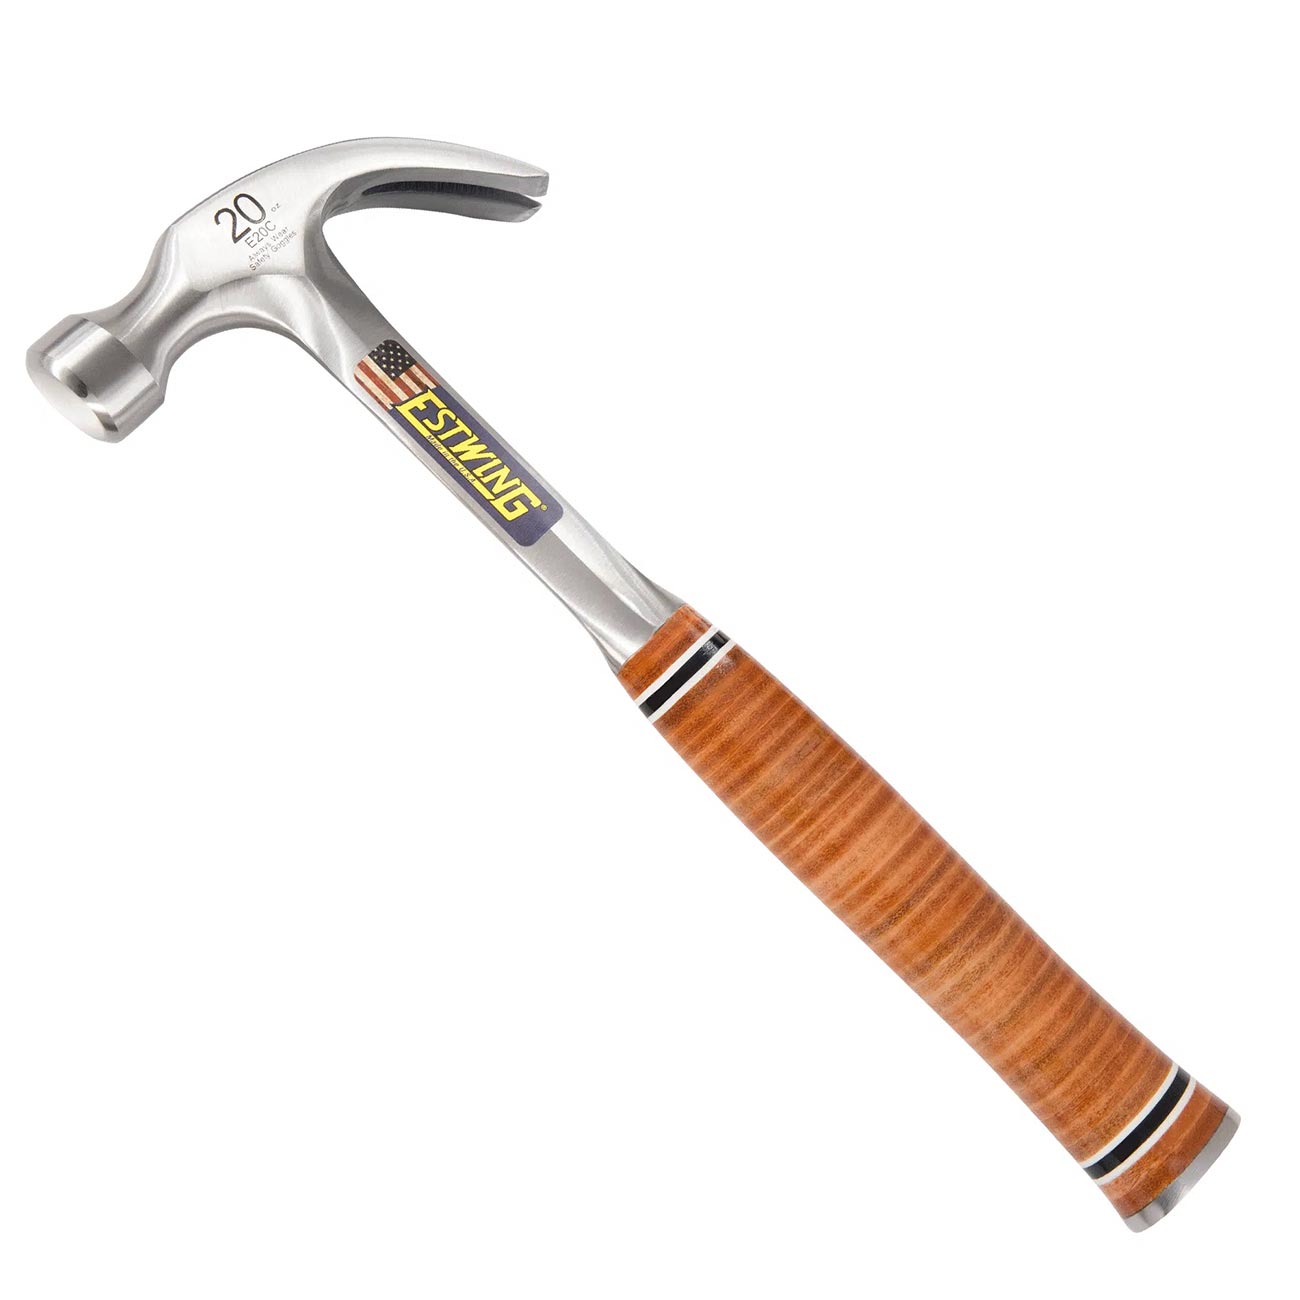 Estwing 16 oz. Smooth Face Curved Claw Hammer - Leather Grip